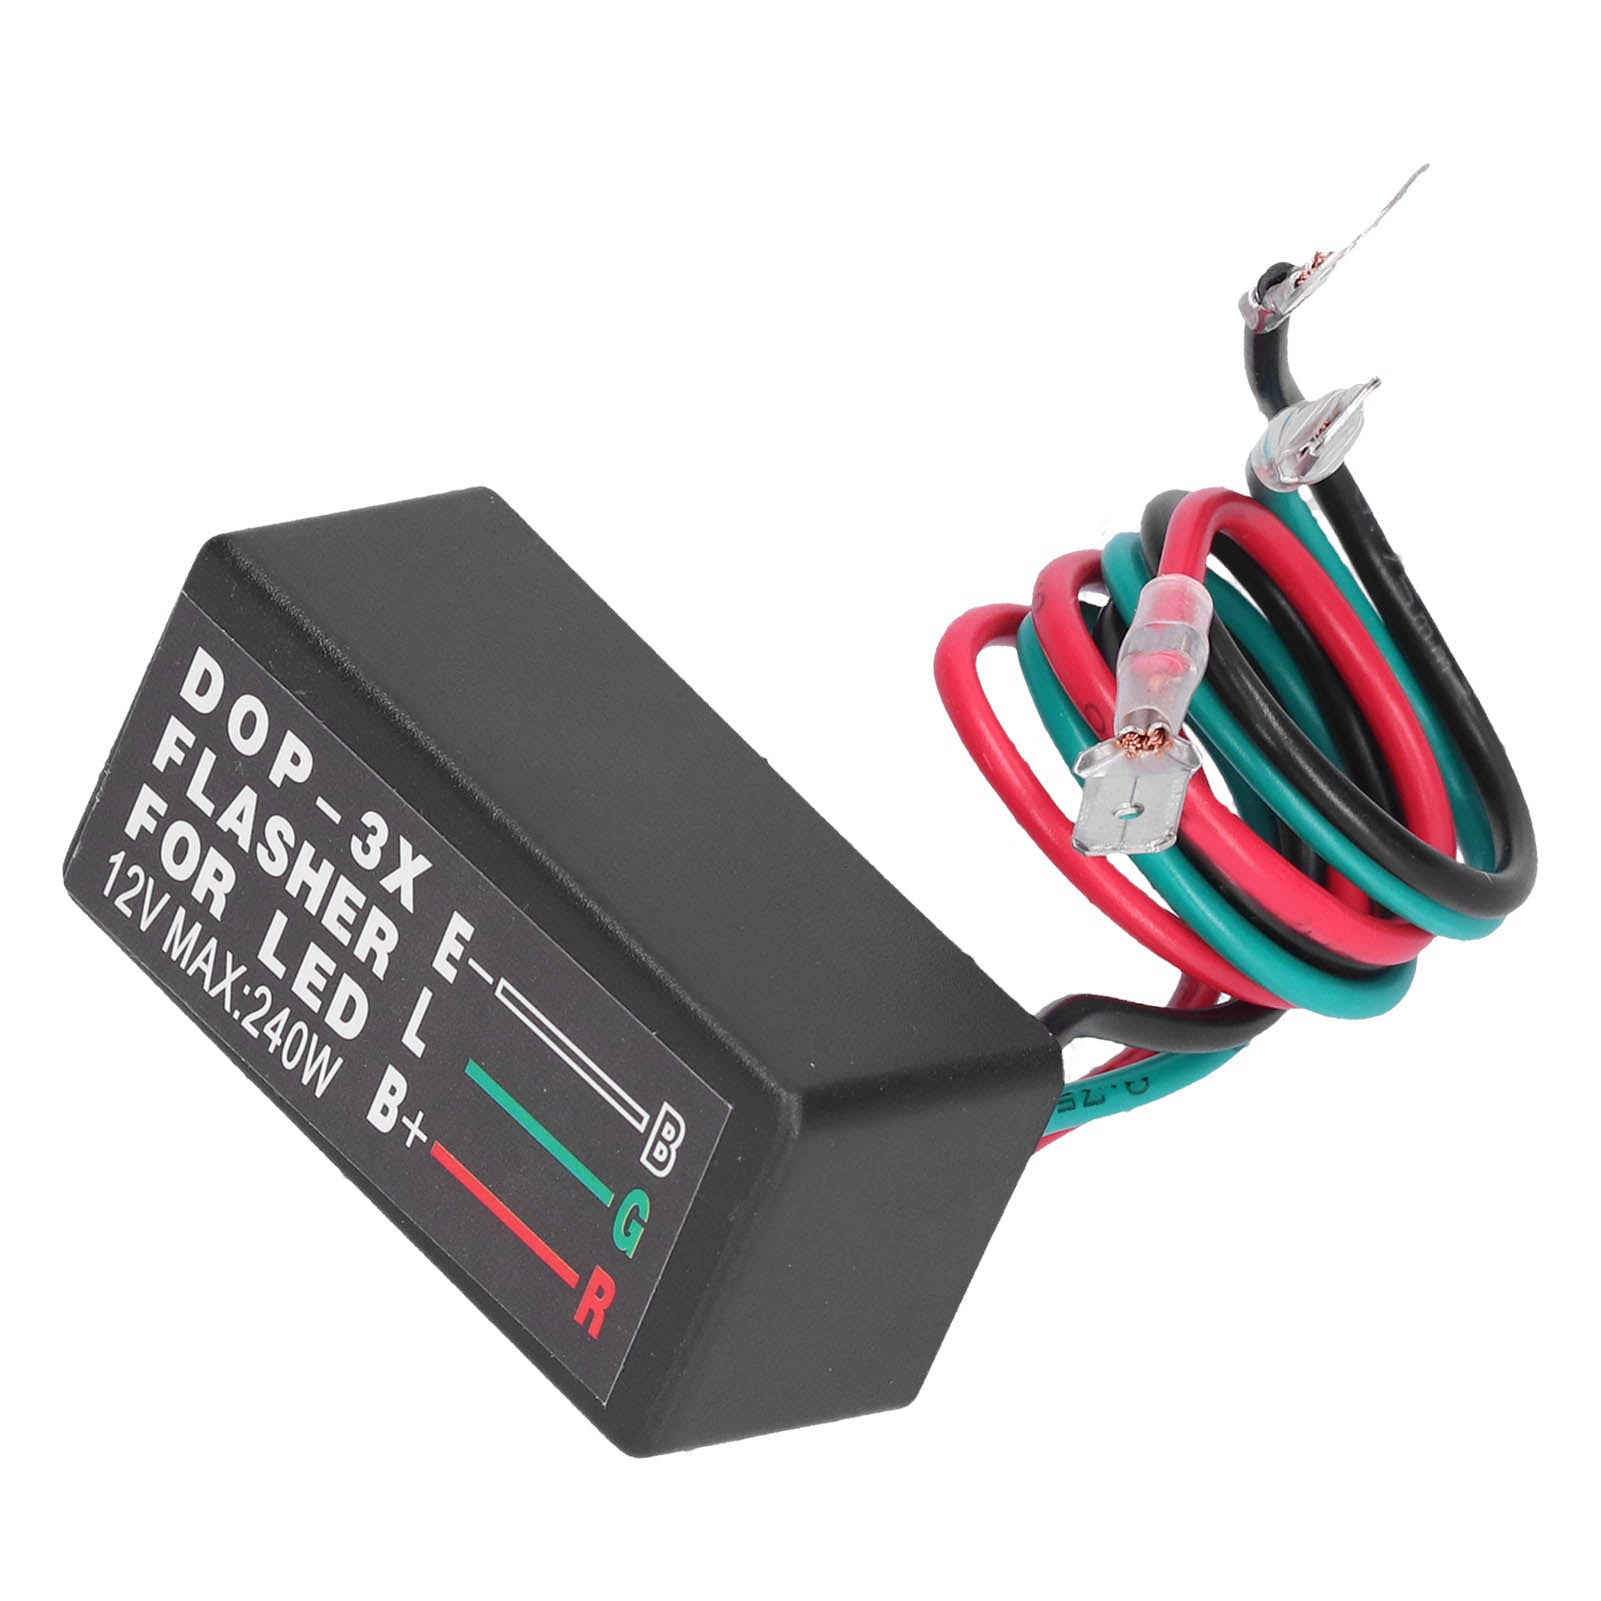 LED Flasher Module, Turn Flash Relay International Standard Pin Plug And Play For Motorcycle For Car - Walmart.com